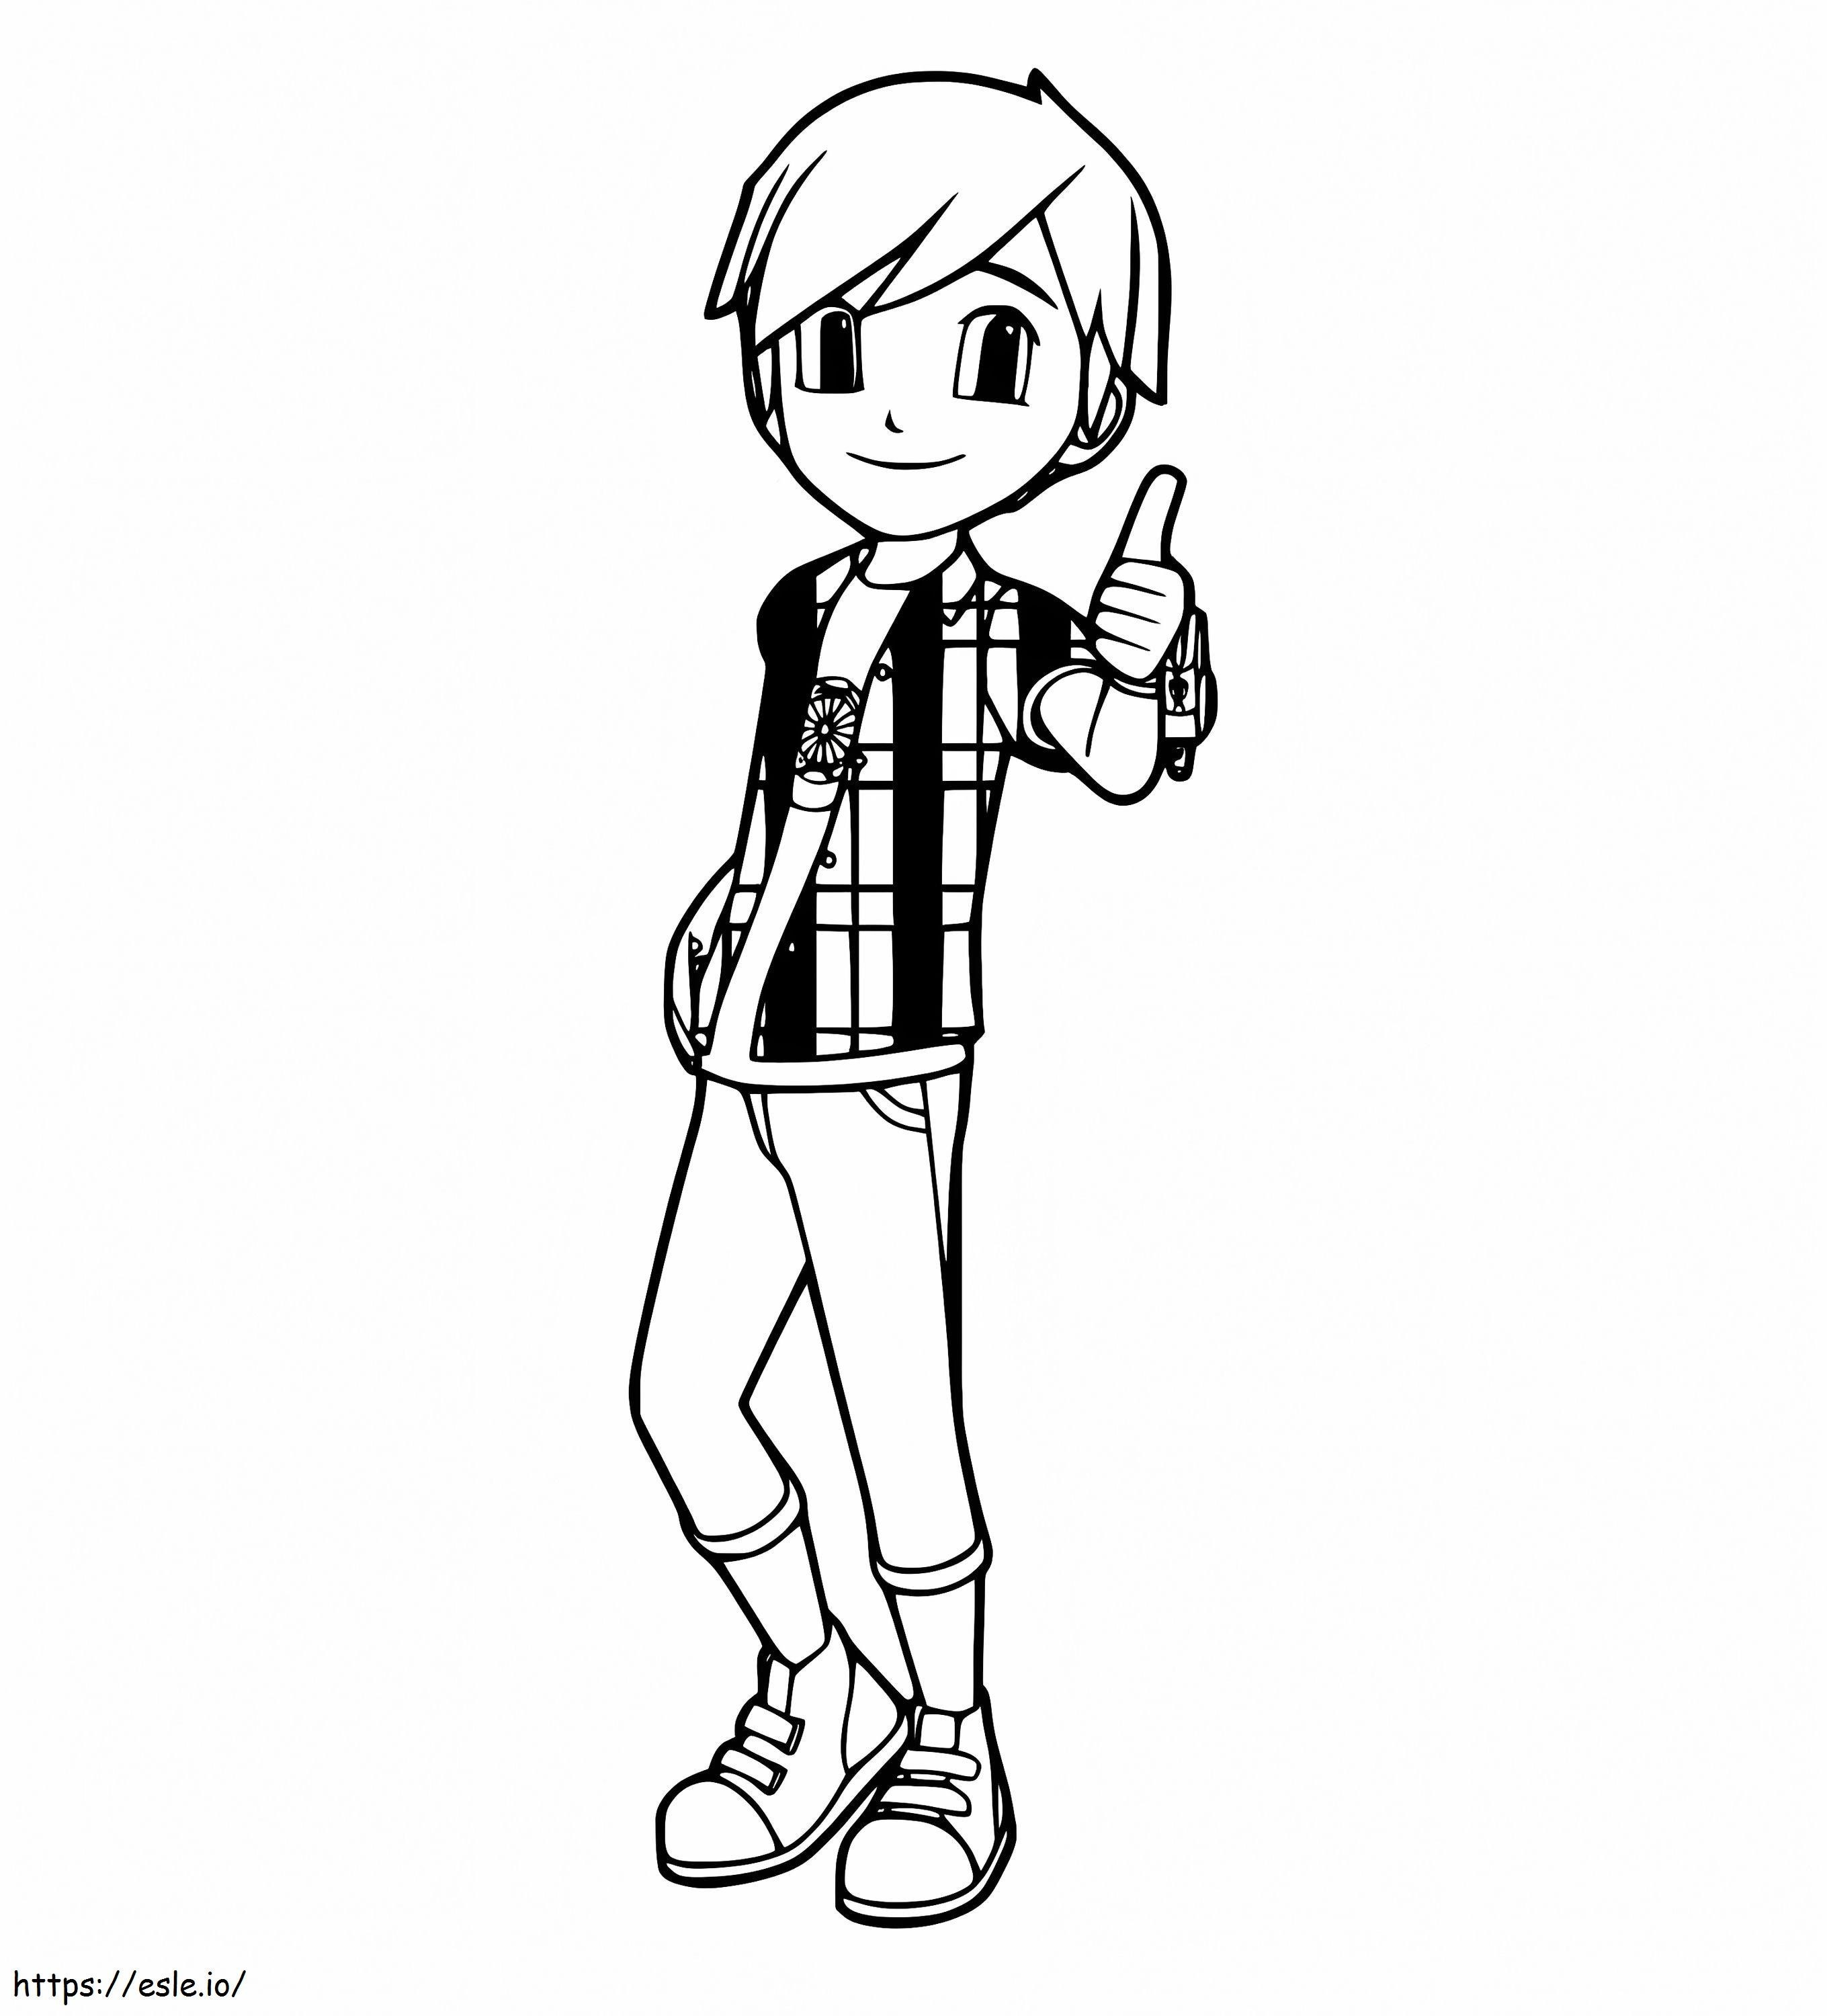 Ryan From Tobot coloring page